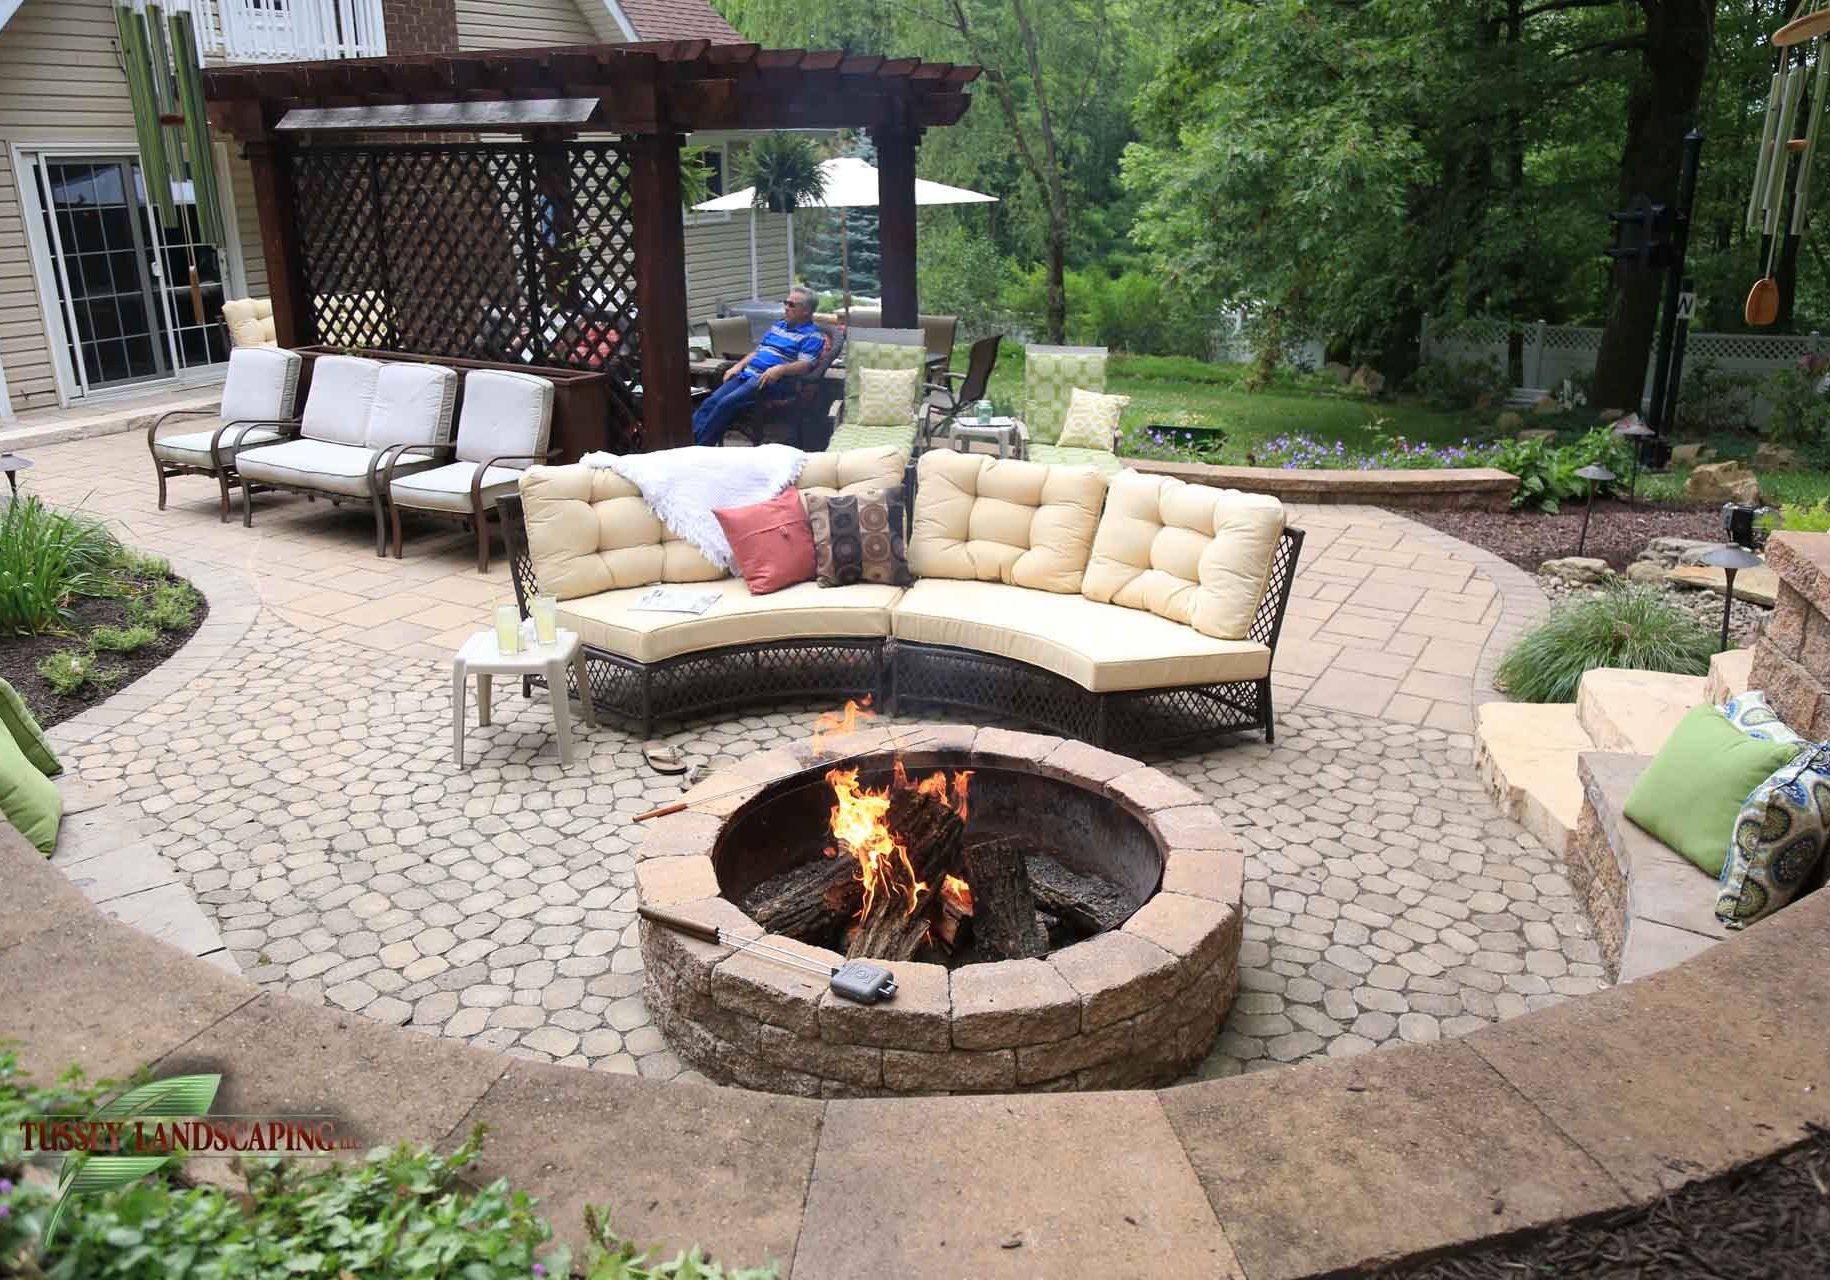 A backyard with a fire pit and patio furniture.